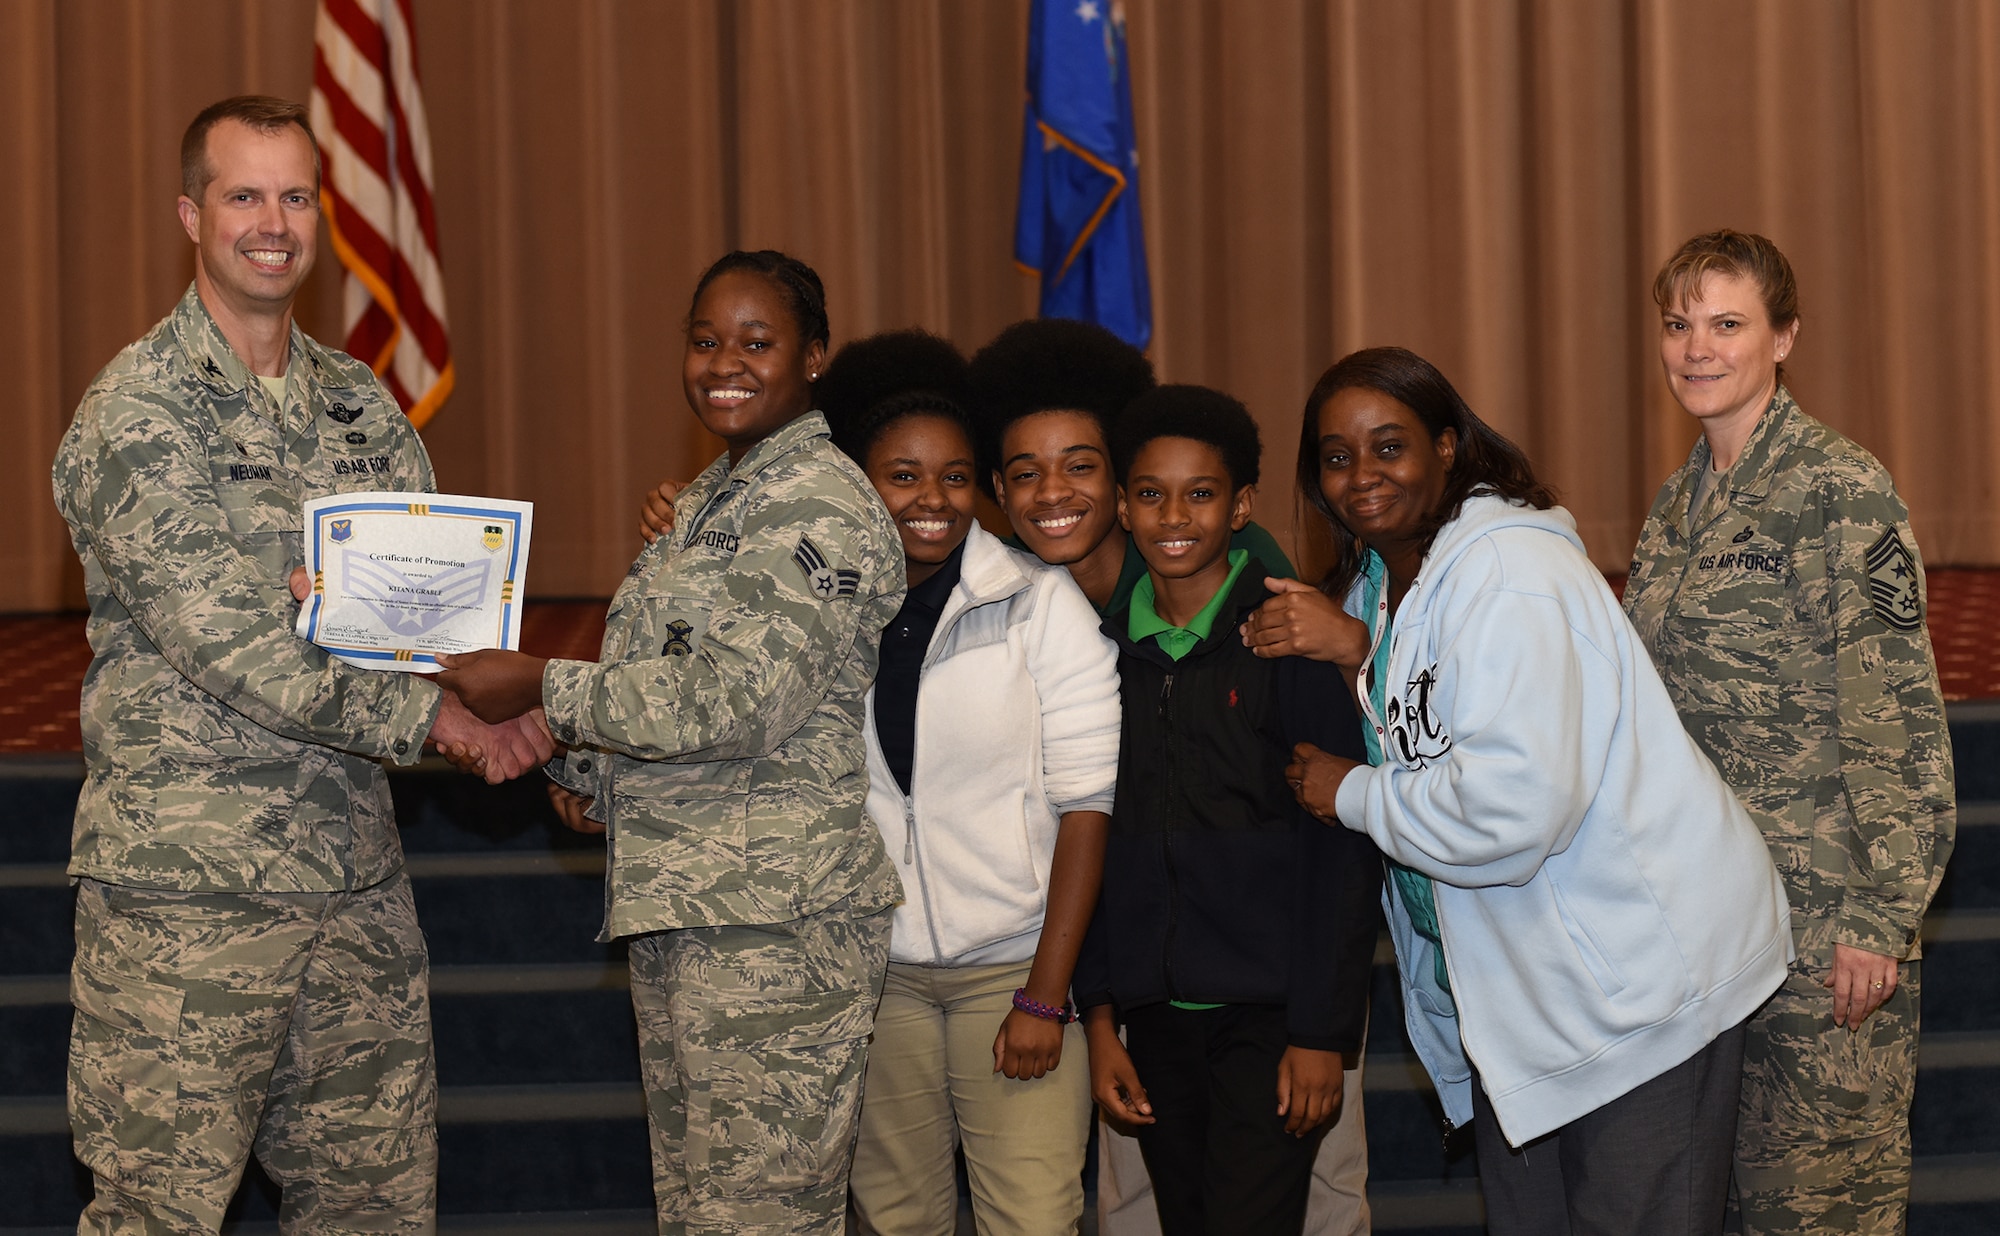 Senior Airman Kitana Grable, 2nd Security Force Squadron installation access controller, is presented with a certificate of promotion with her family at Barksdale Air Force Base, La., November 2, 2016. Kitana’s mother and three siblings lost their home in Macon, Ga., to a house fire July 3. The Grable family has since moved to Barksdale, where Kitana has taken them in and is helping support them. (U.S. Air Force photo/Airman Alexis Schultz)